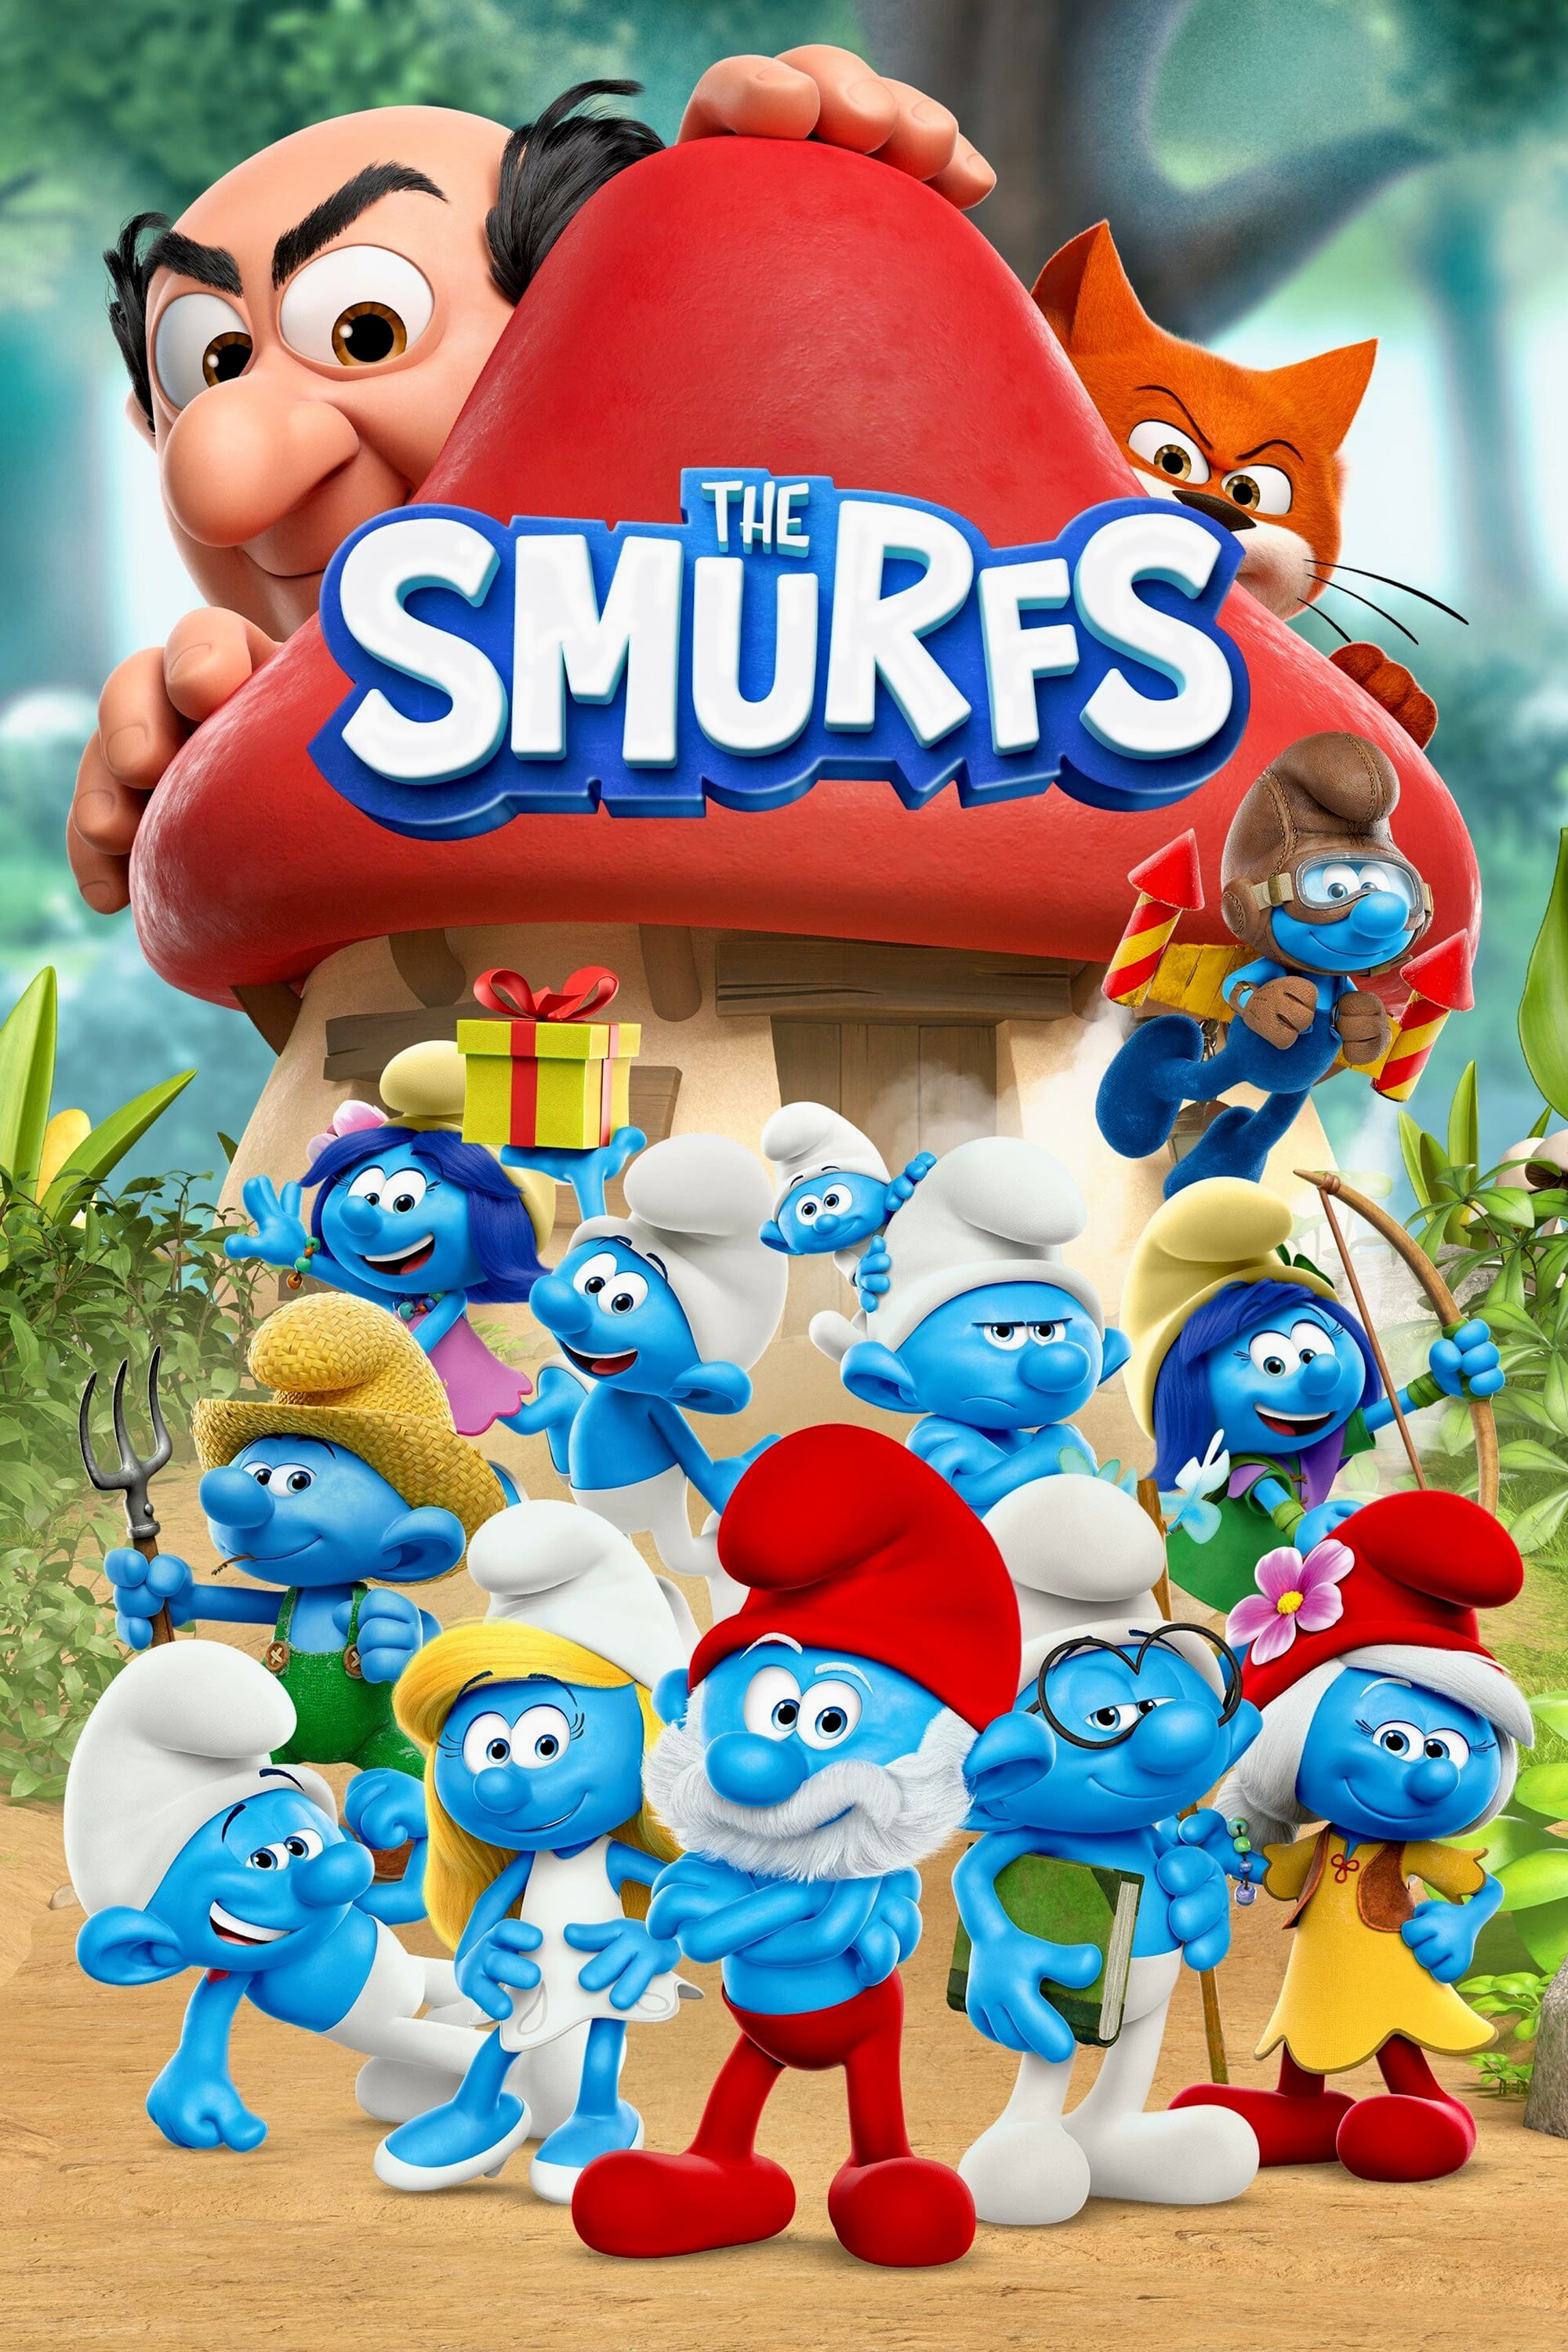 appoon balan recommends a picture of a smurf pic